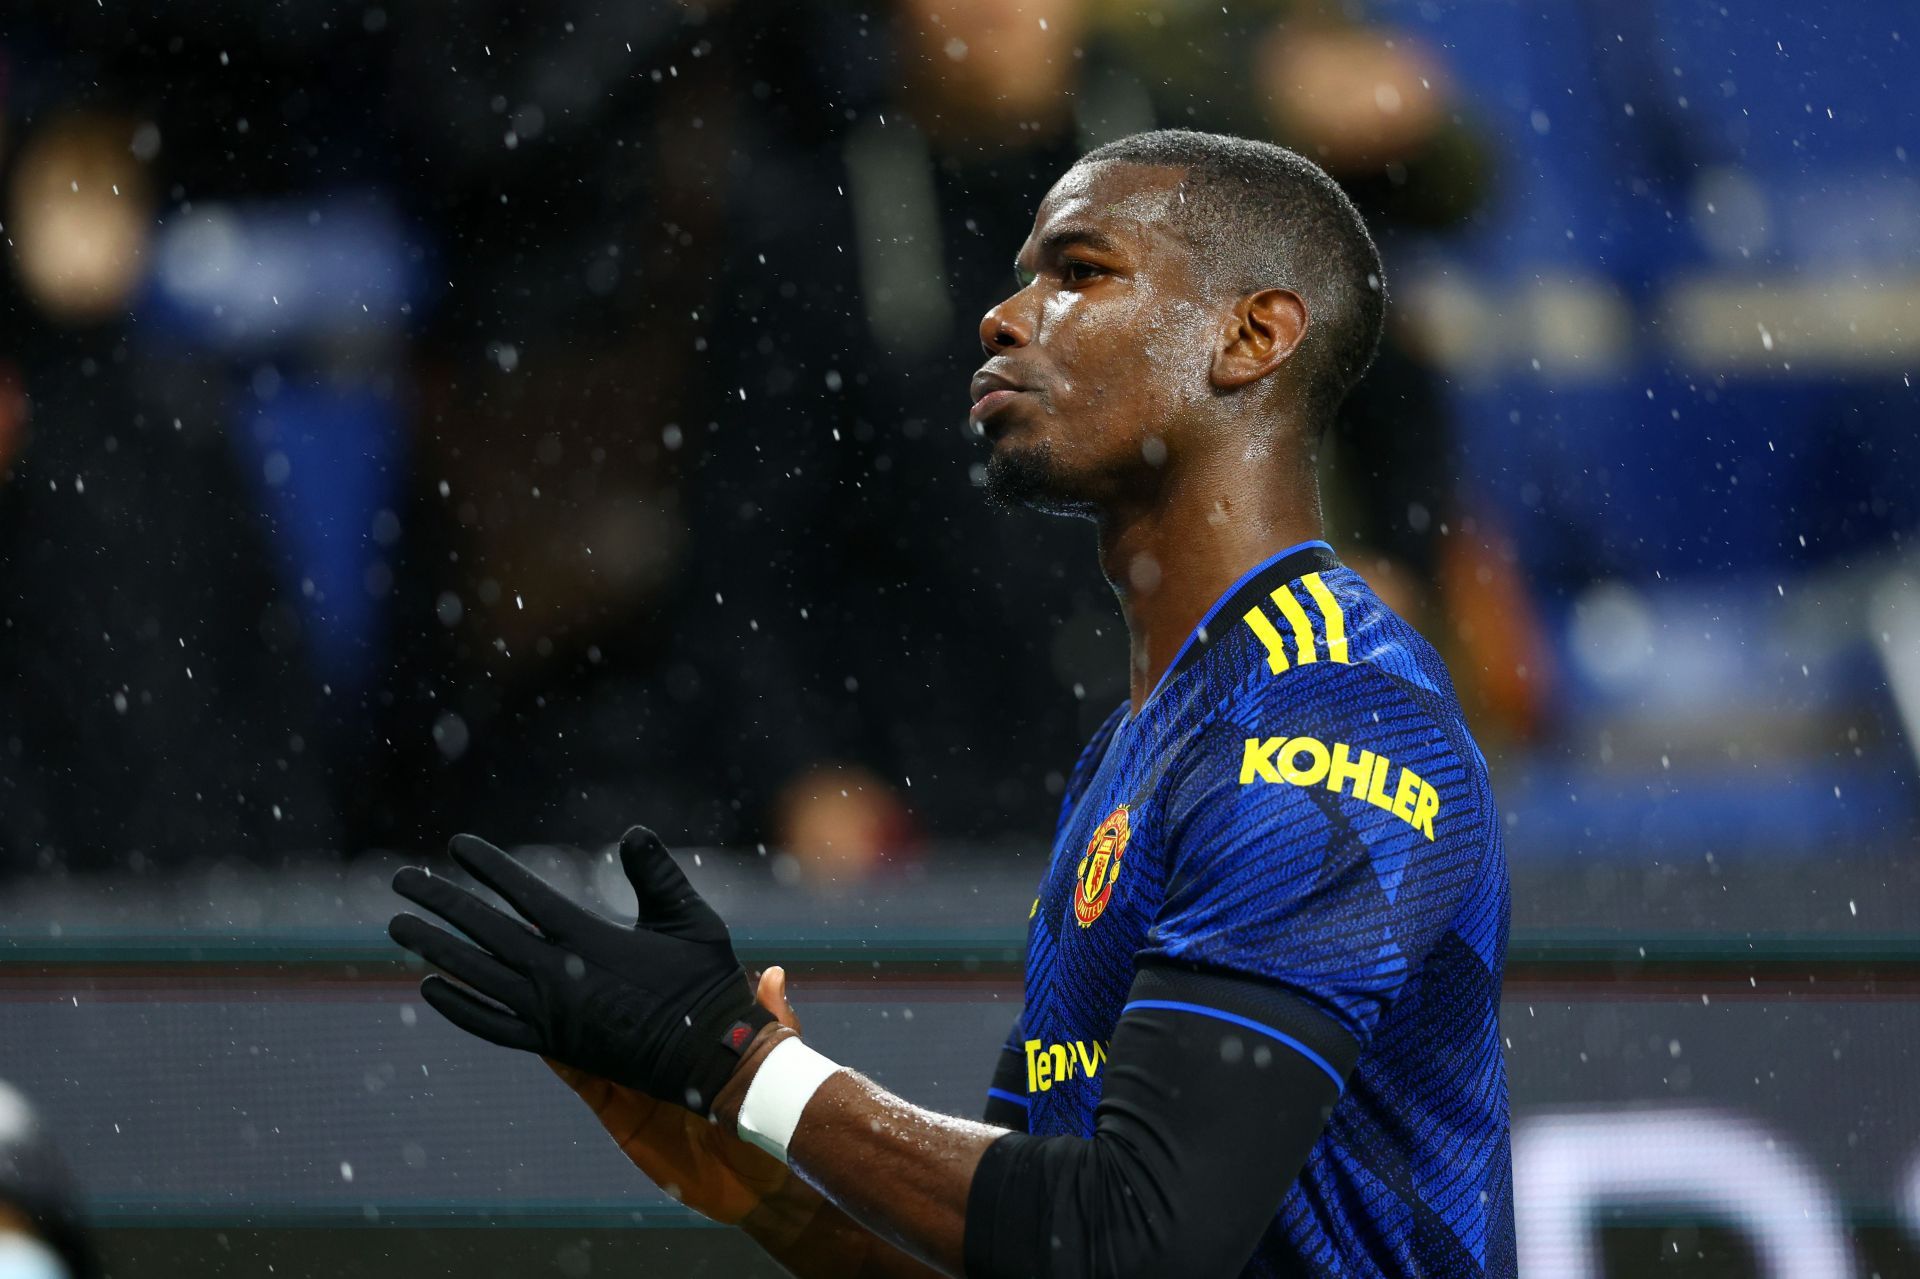 Paul Pogba debuted a new hairstyle against Tottenham